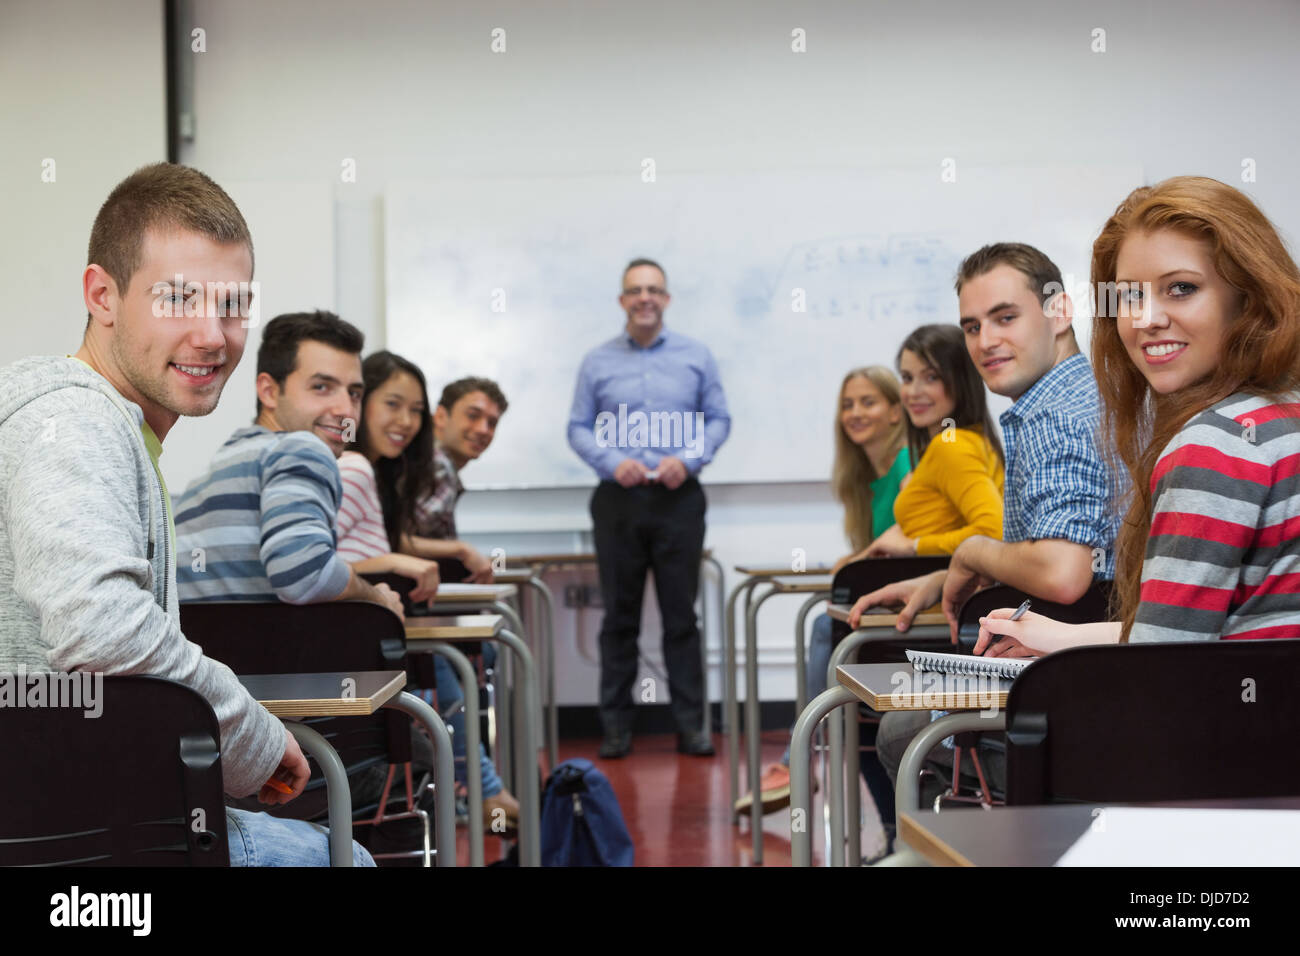 Students and lecturer smiling at camera in classroom Stock Photo